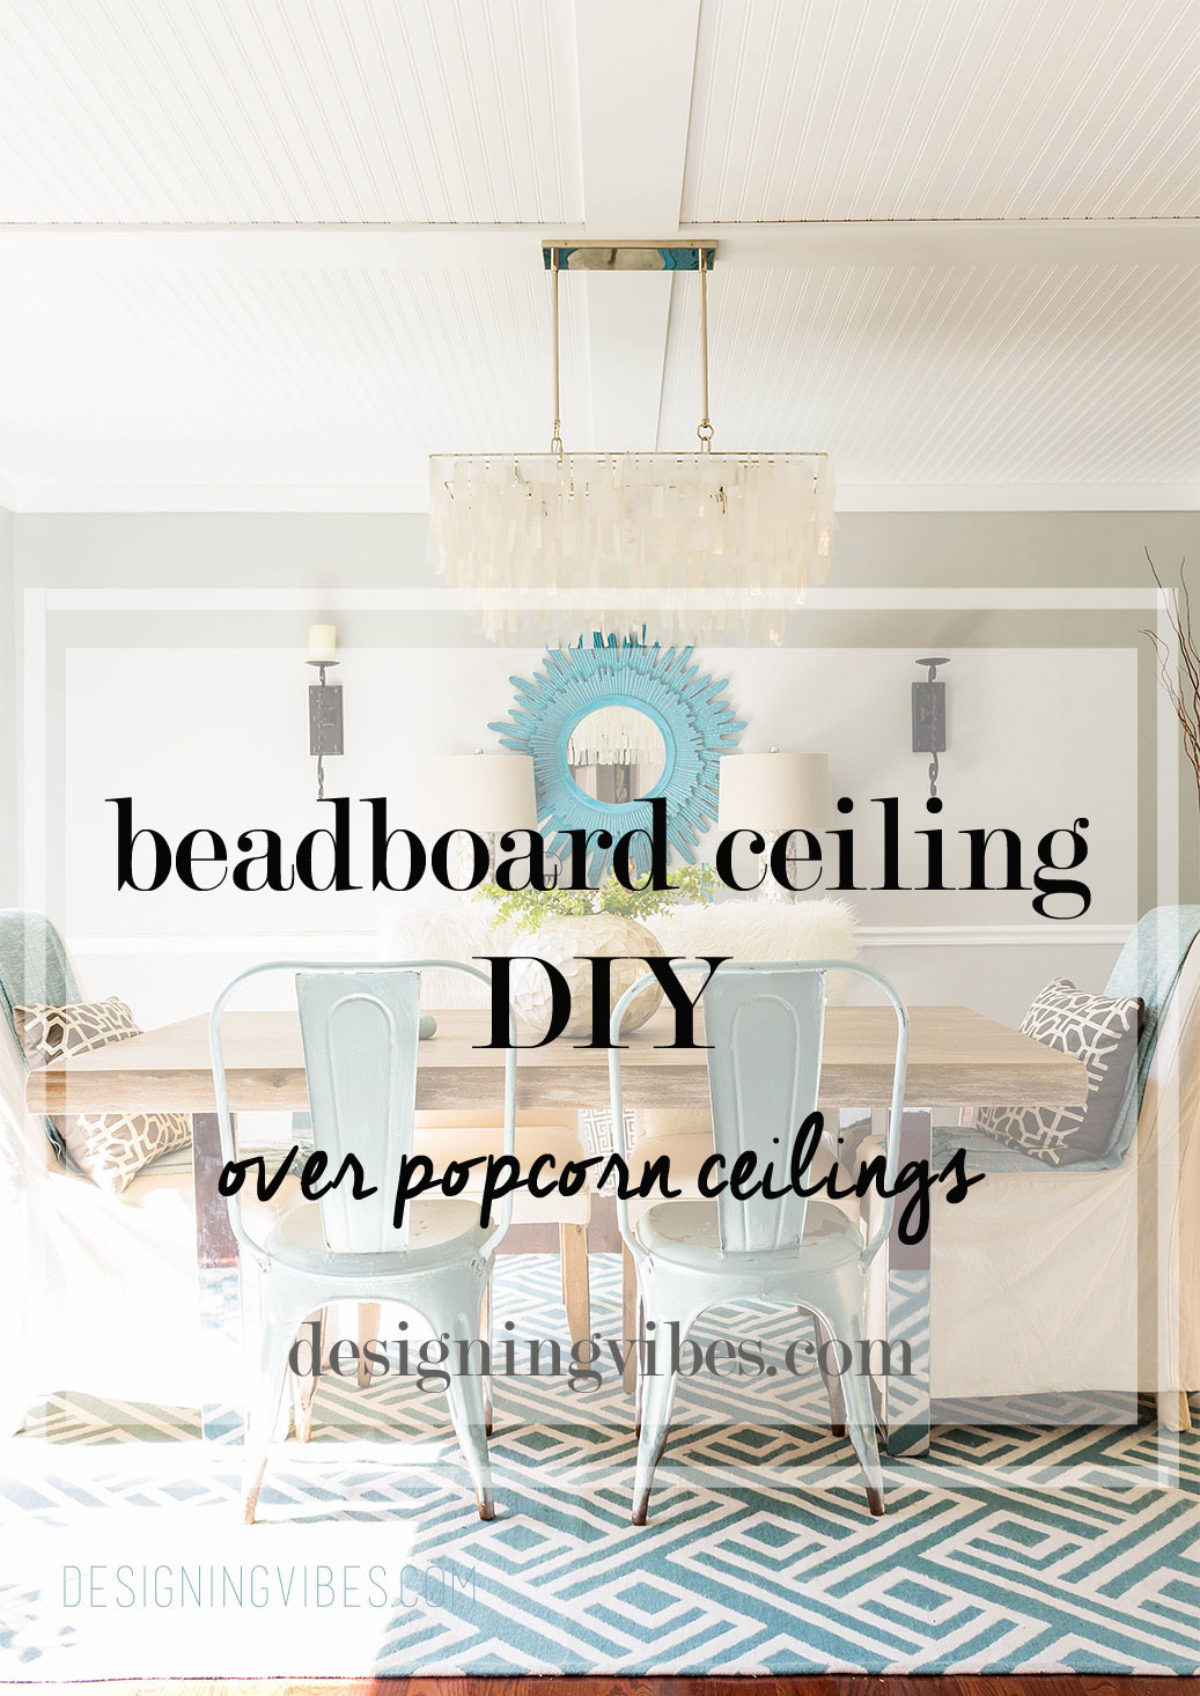 How To Cover Popcorn Ceiling With, How To Cover Popcorn Ceilings With Beadboard